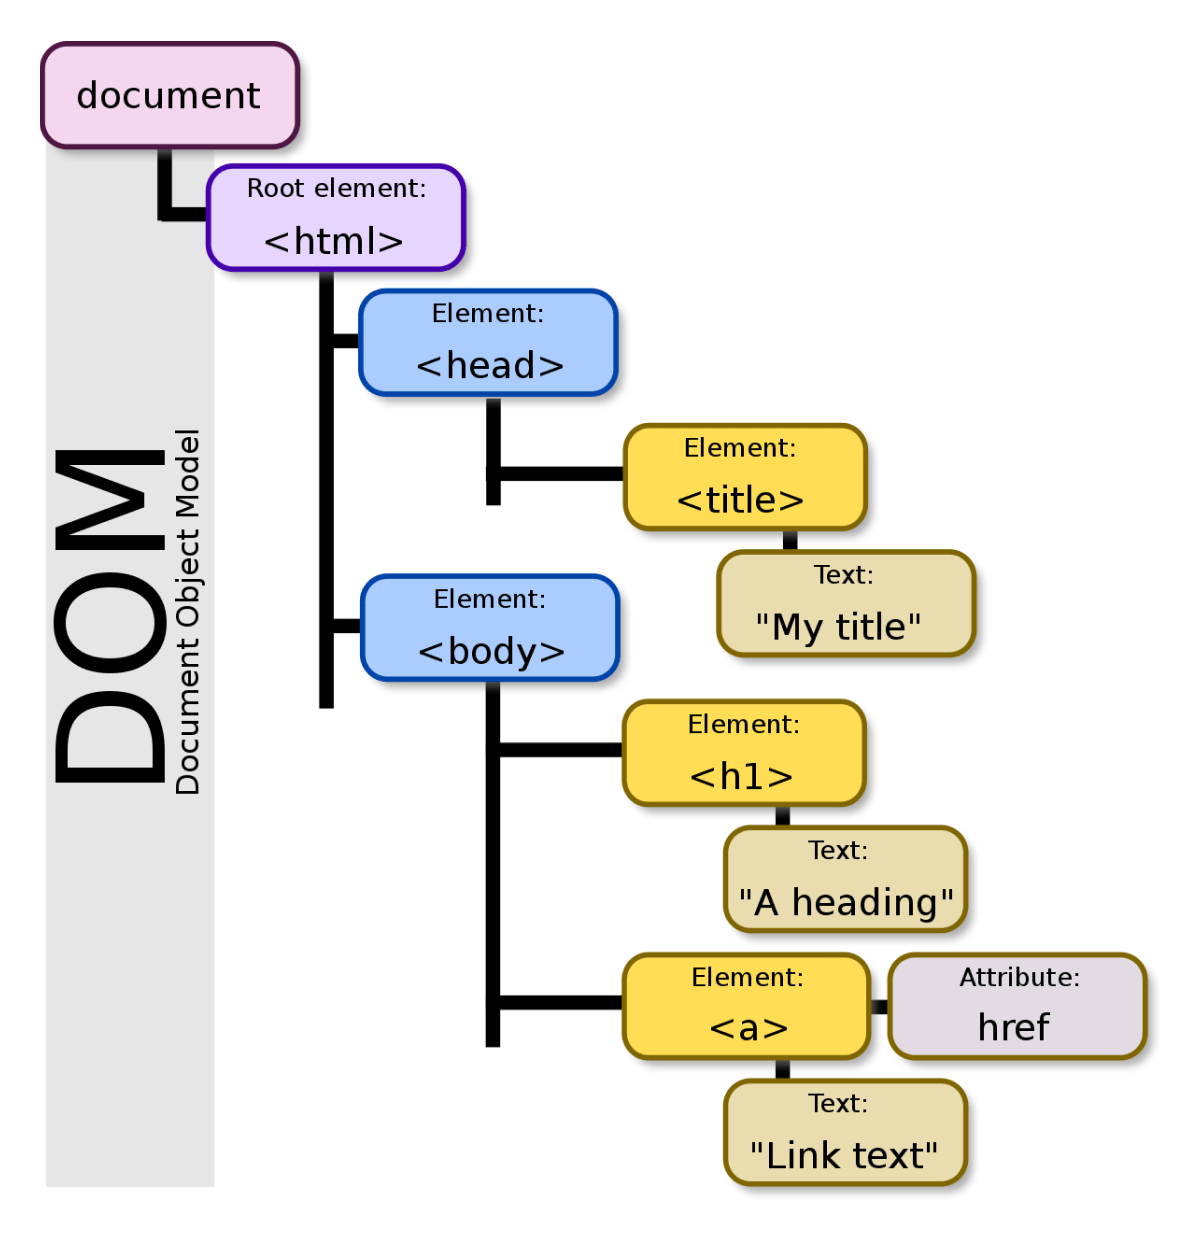 Diagram of the document object model representing a tree hierarchy of html nodes.